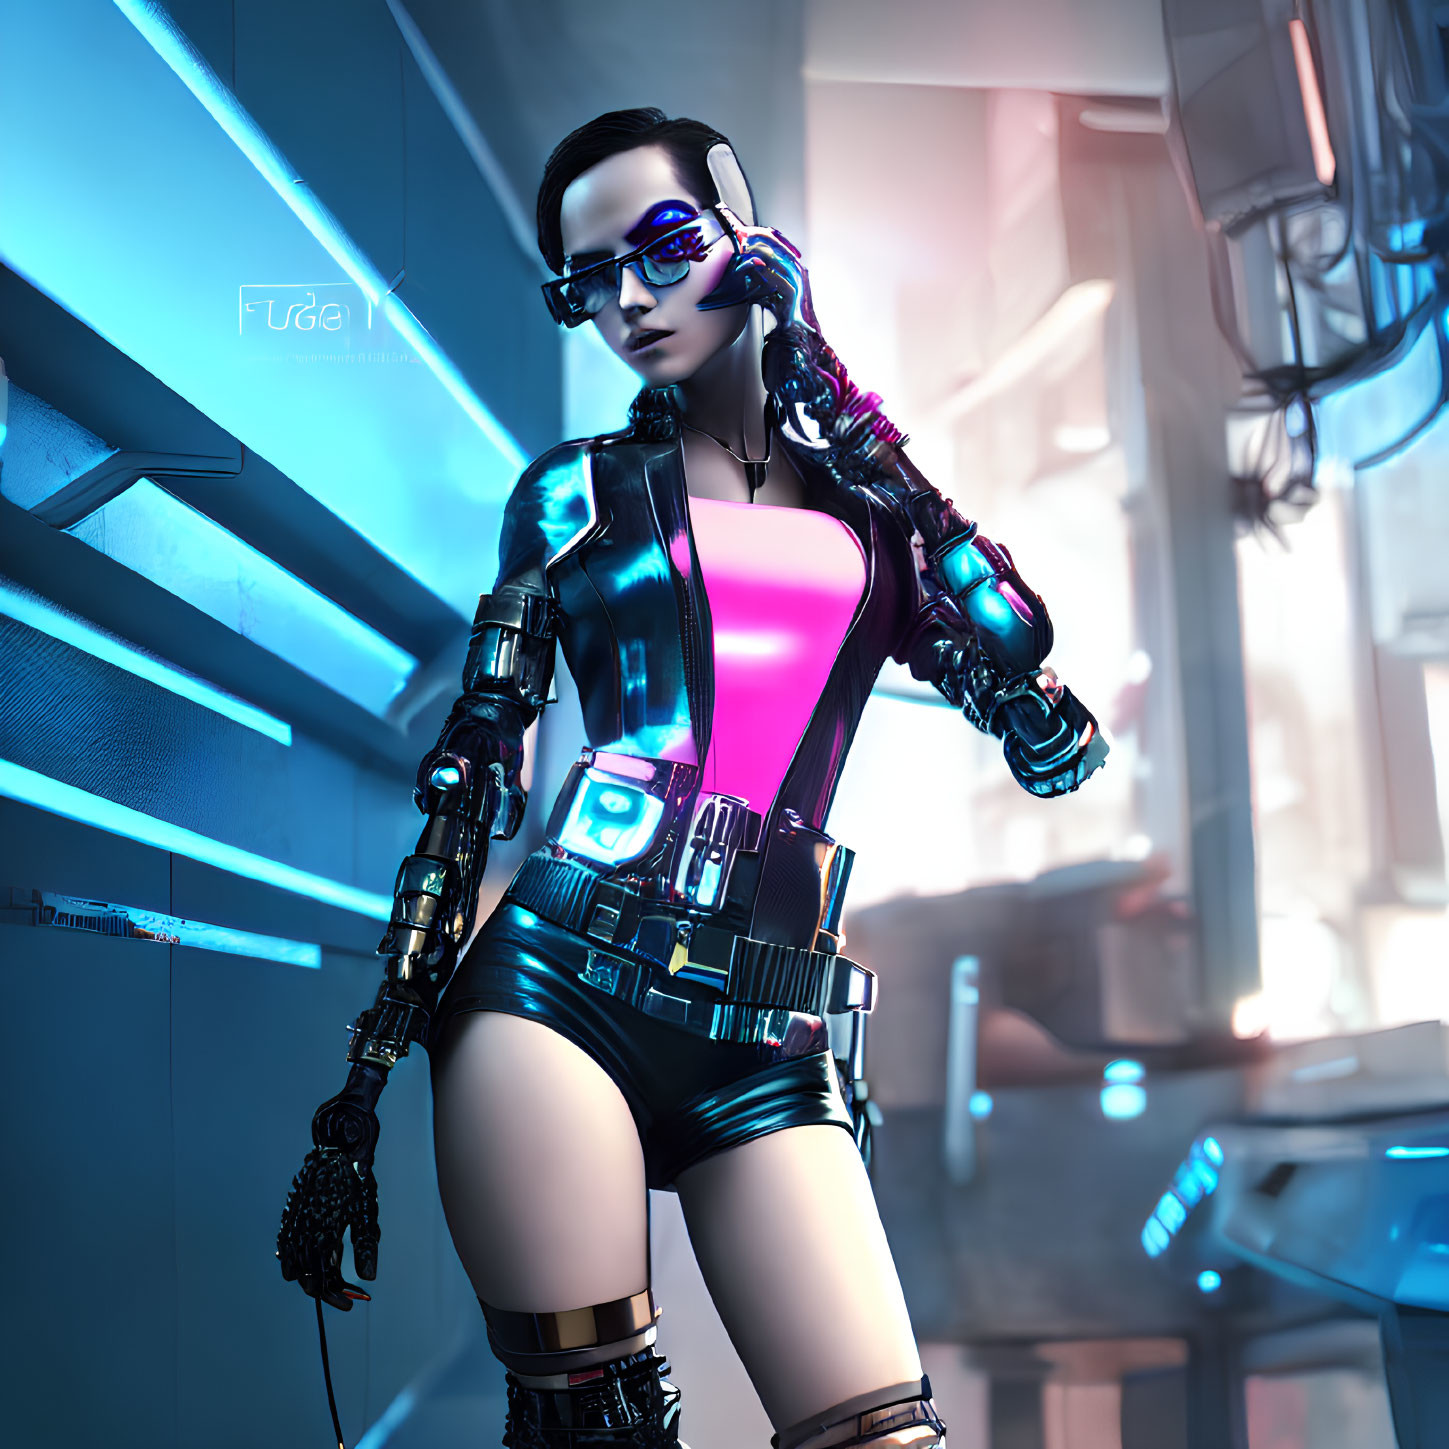 Futuristic cyberpunk woman with high-tech gear and neon glasses